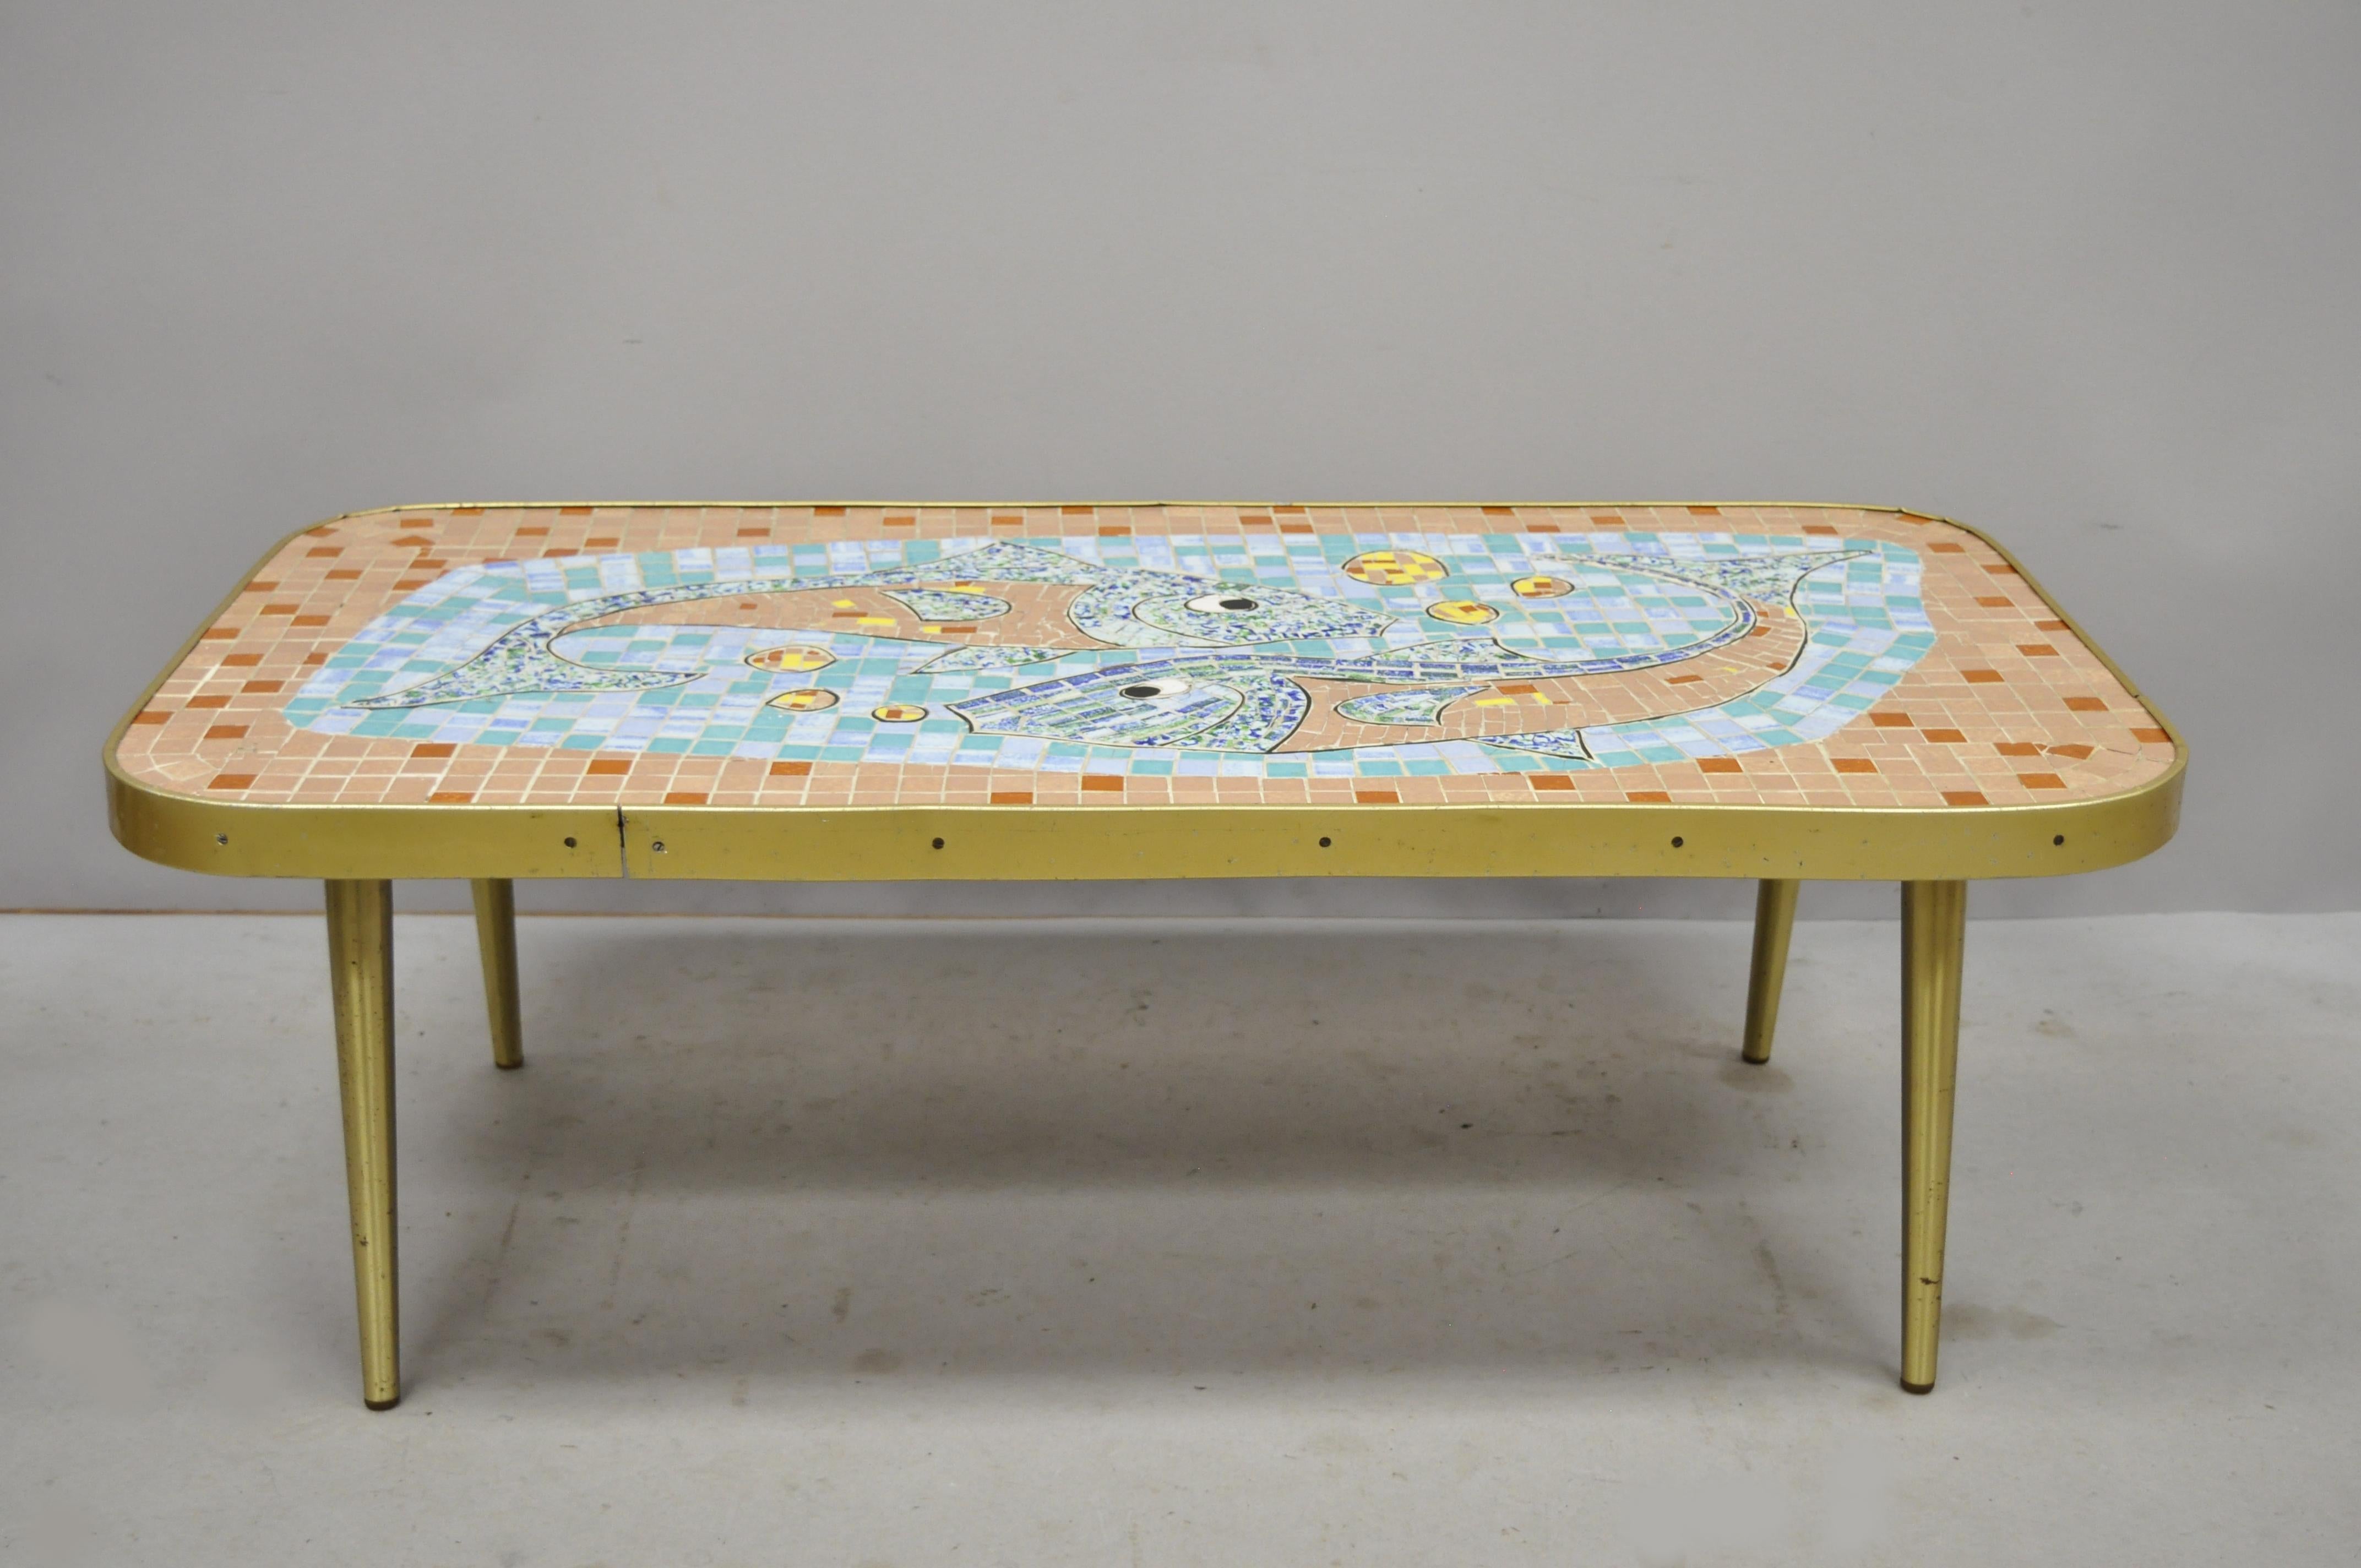 mosaic tile top table